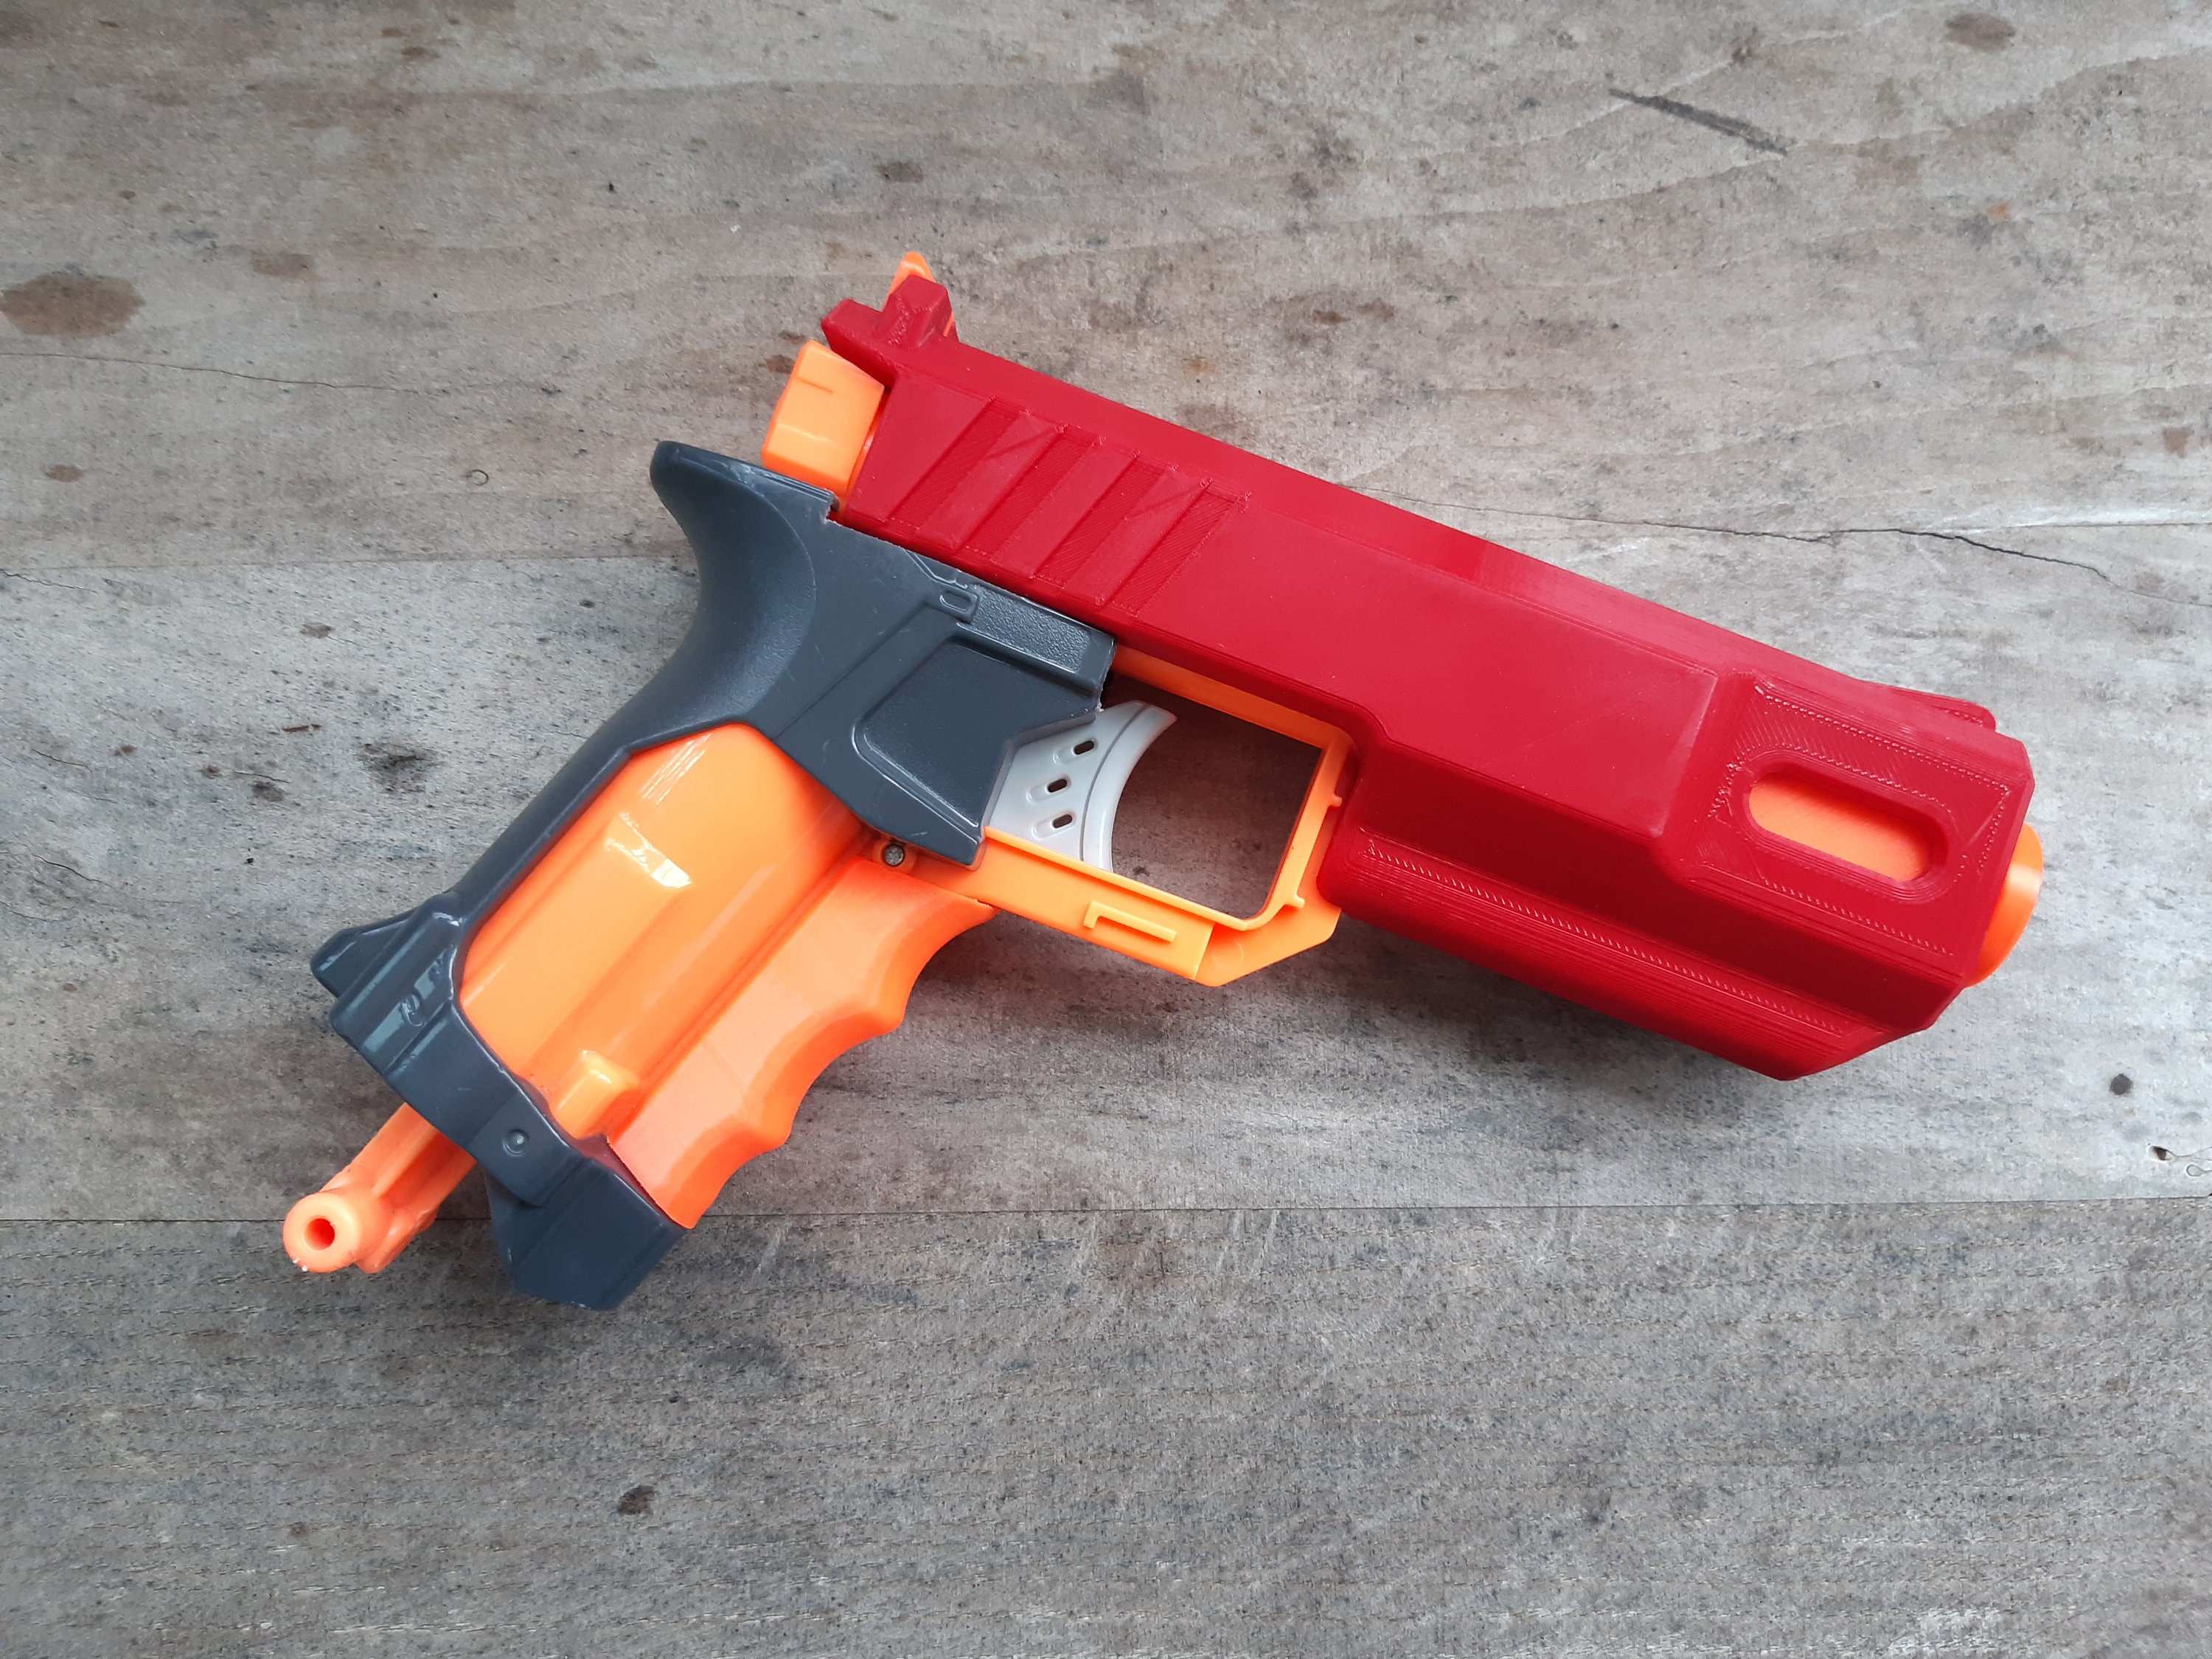 Quik 3d Printed Fully Automatic Flycore Toy Nerf Blaster .STL FILES ONLY 